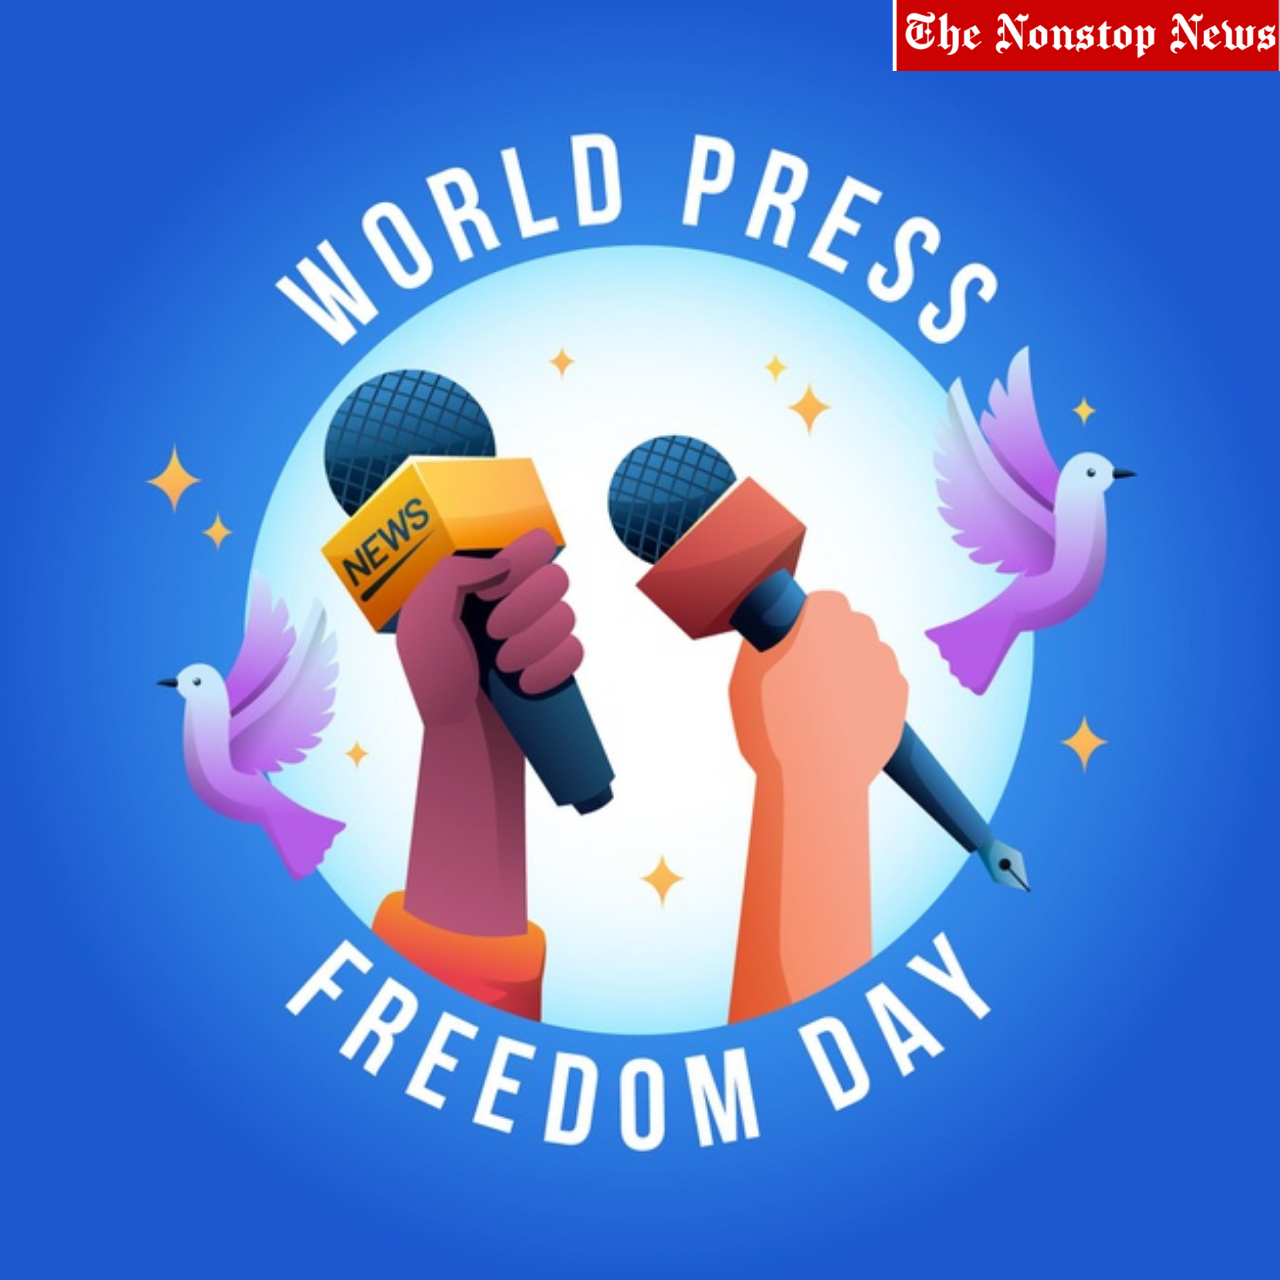 World Press Freedom Day 2021 Theme, Images, and Interesting Quotes